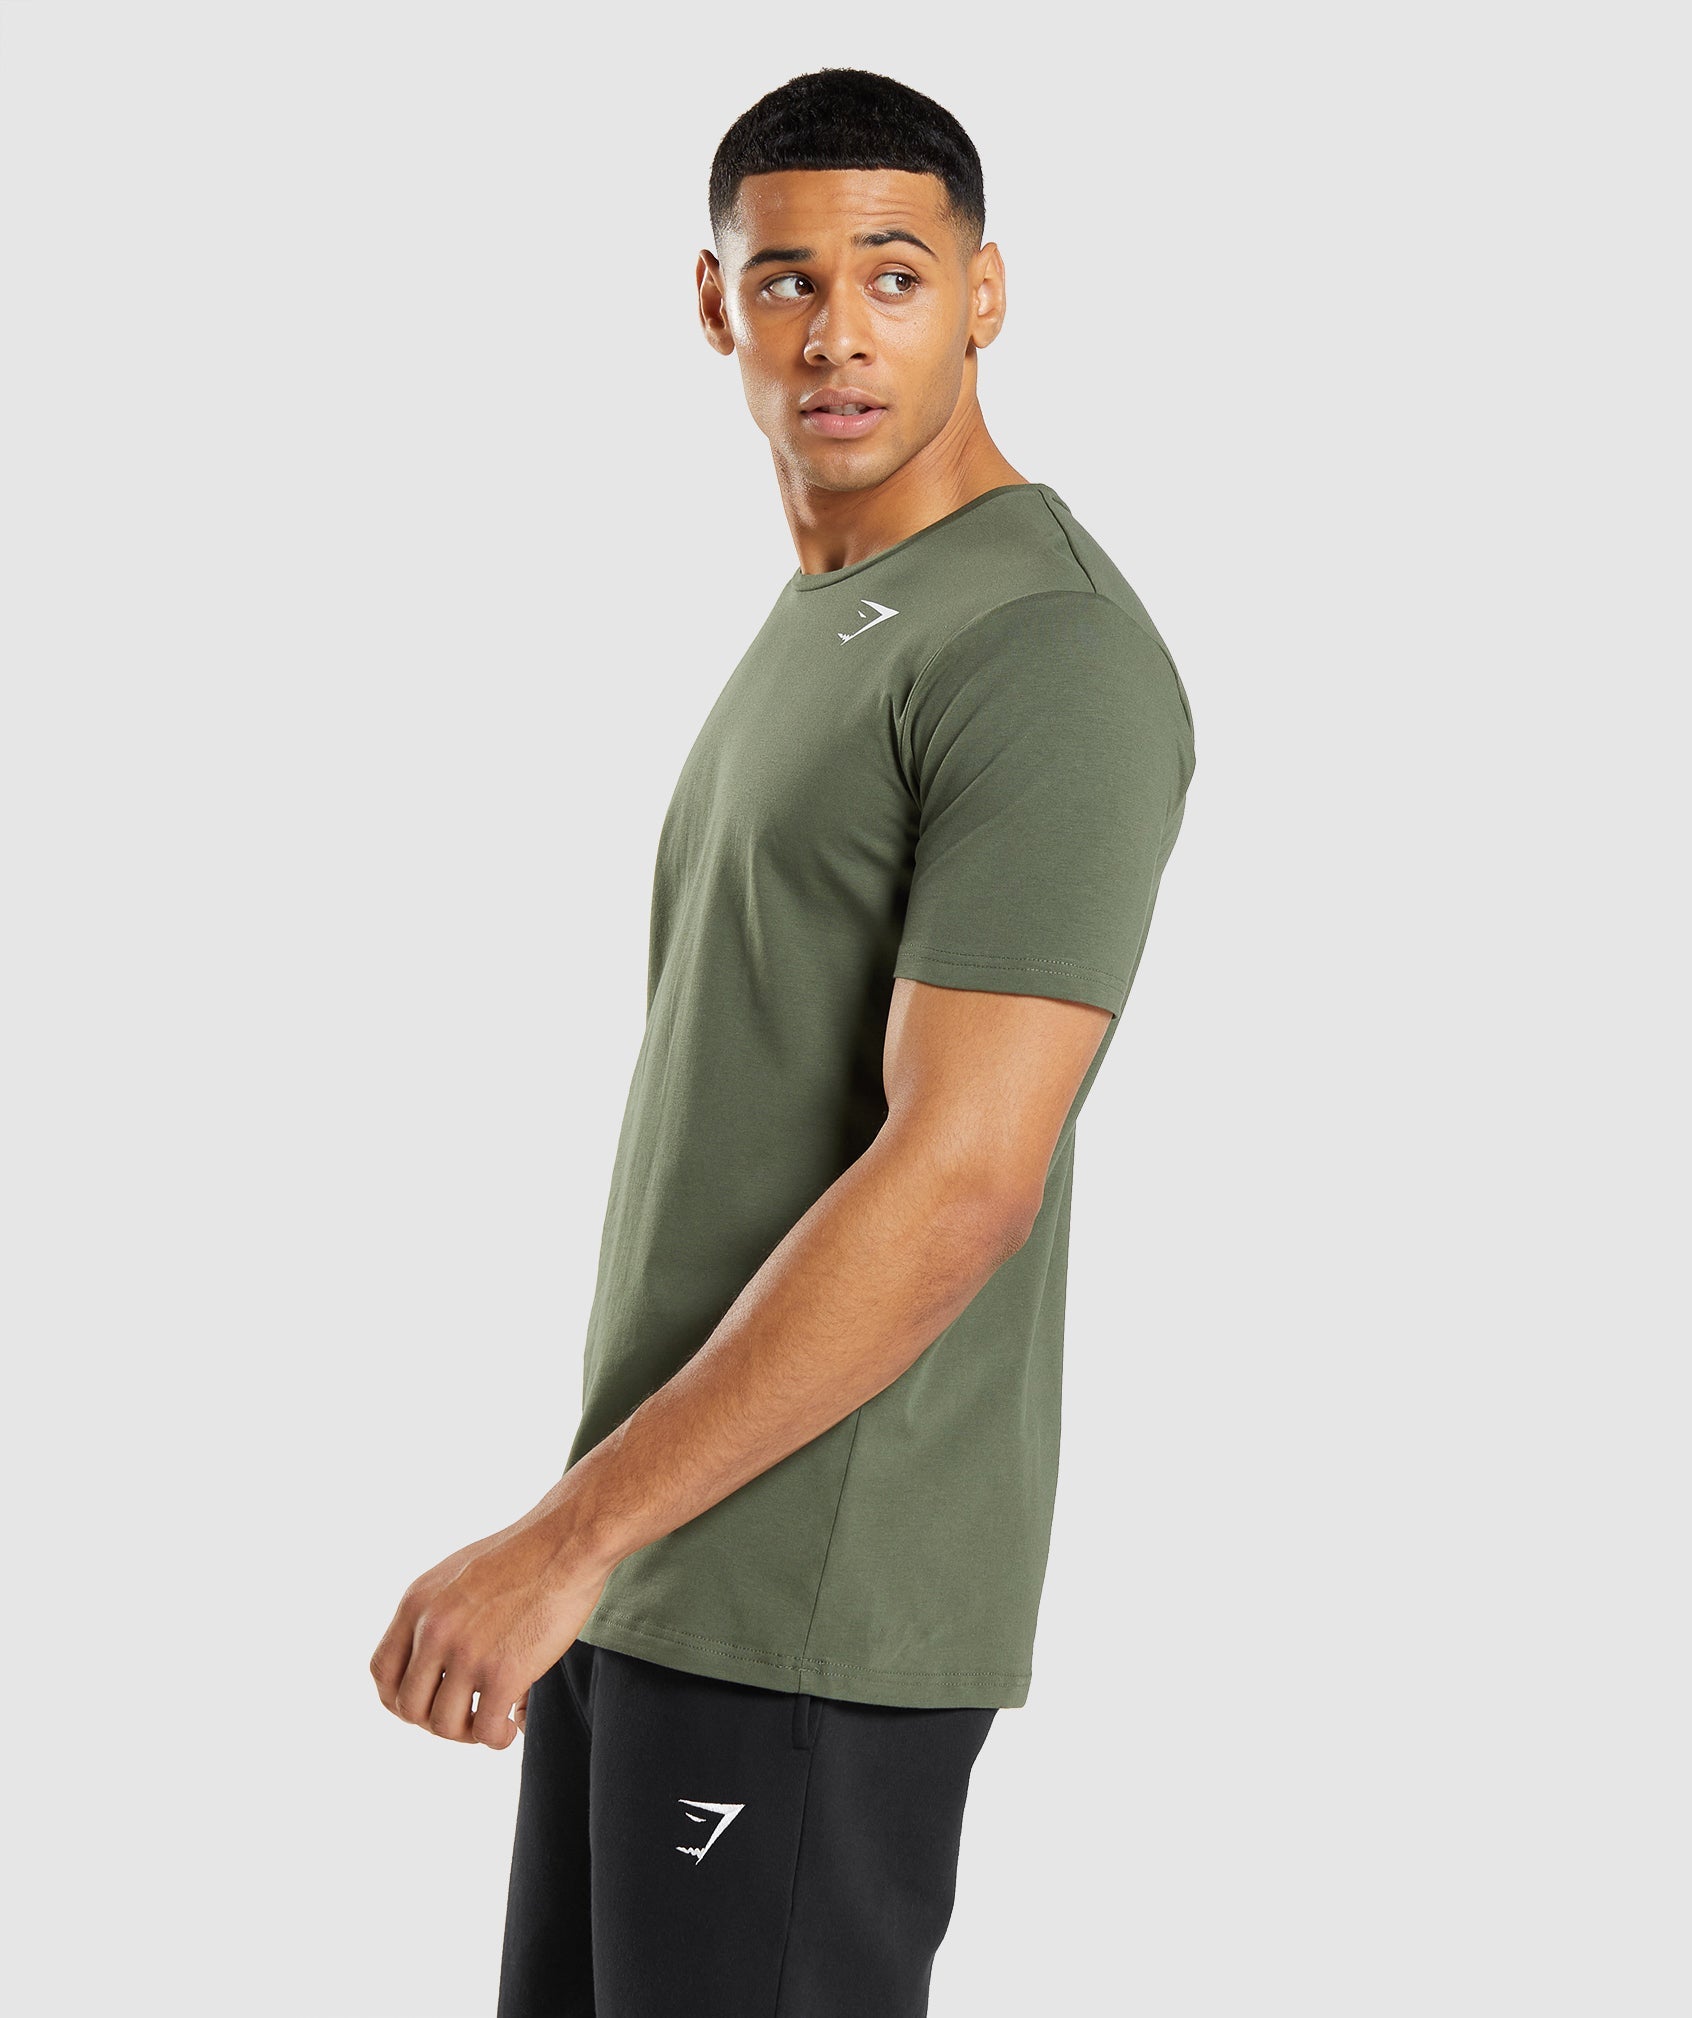 Essential T-Shirt in Core Olive - view 3